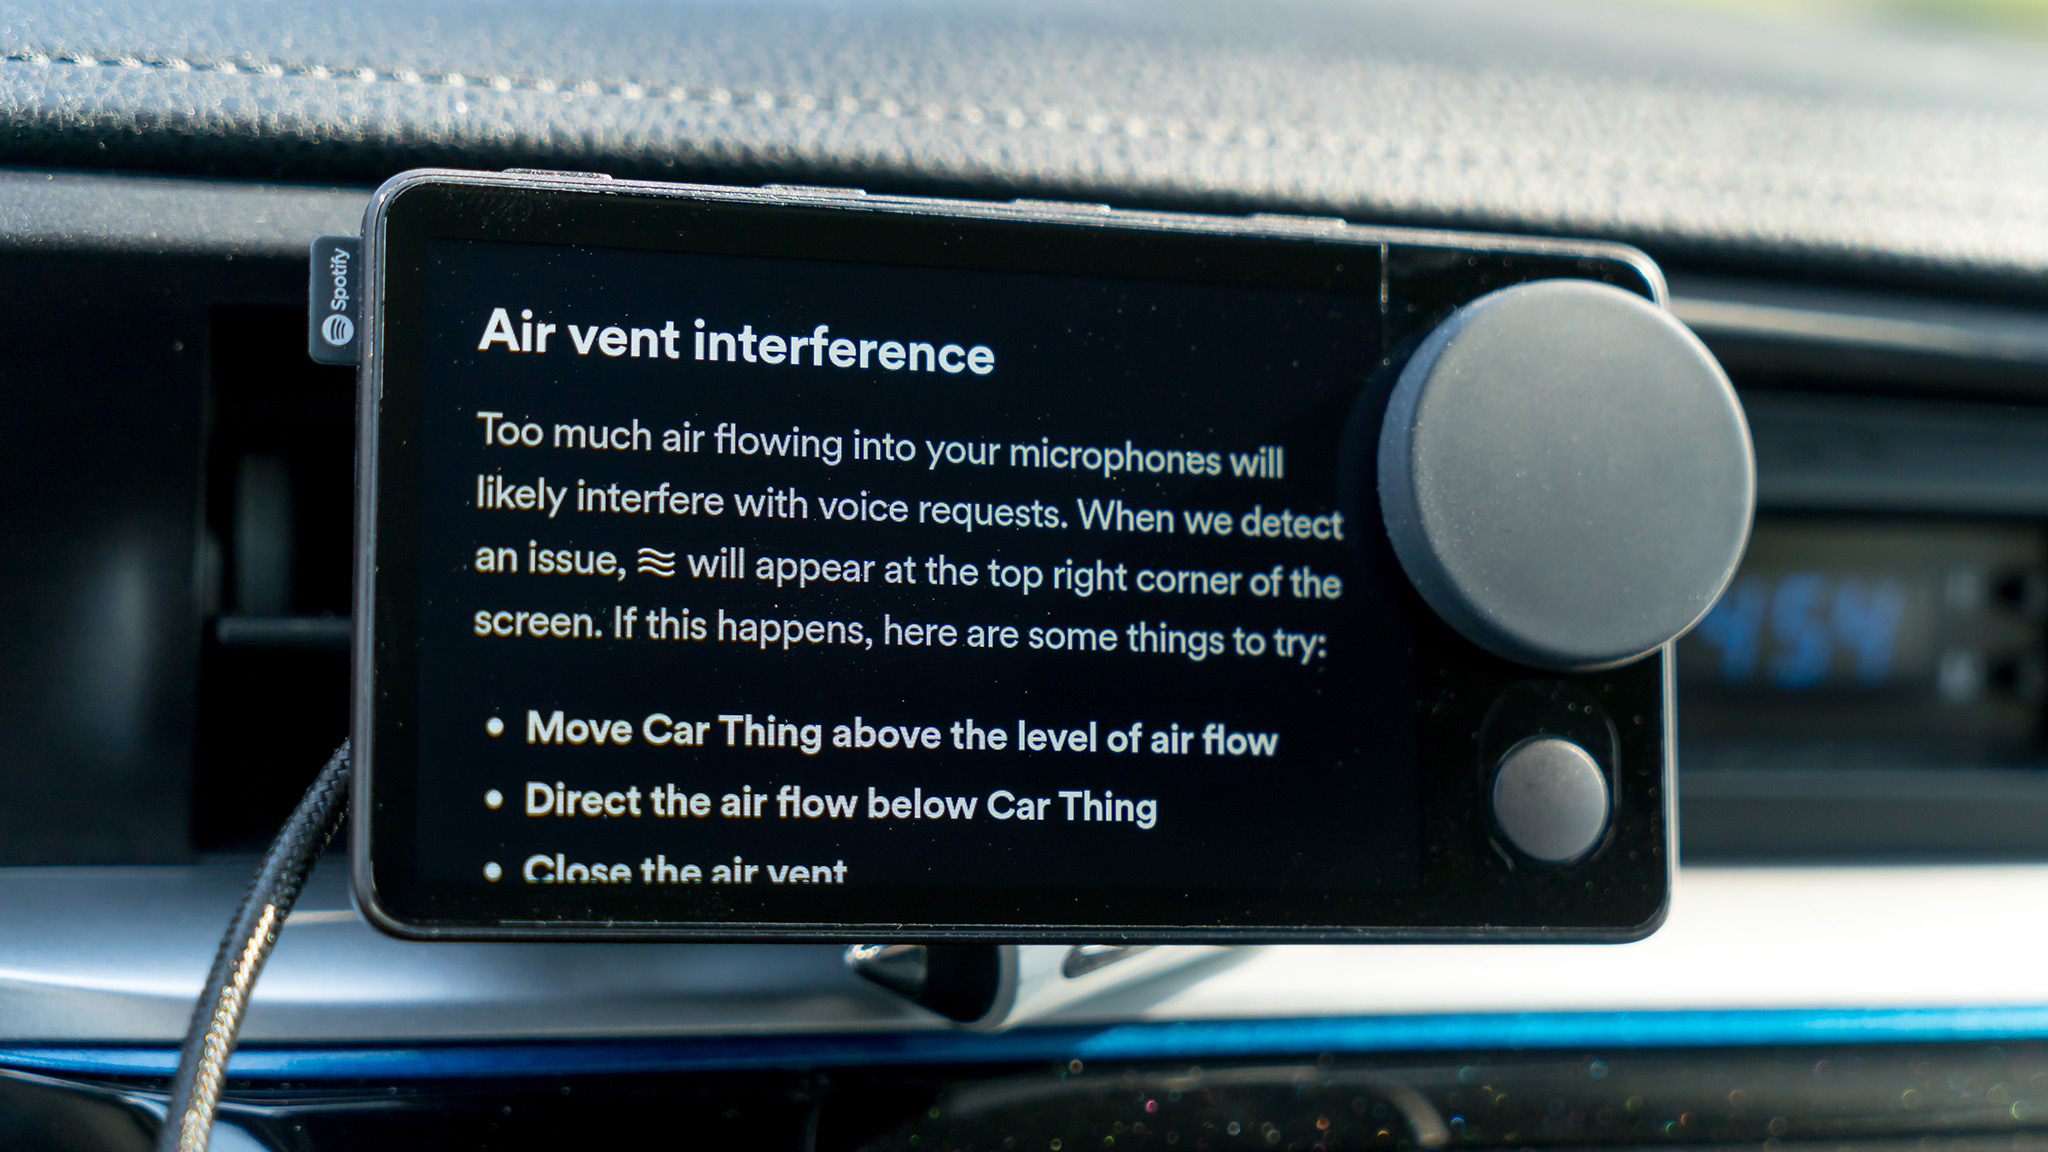 Air vent details on Spotify Car Thing.